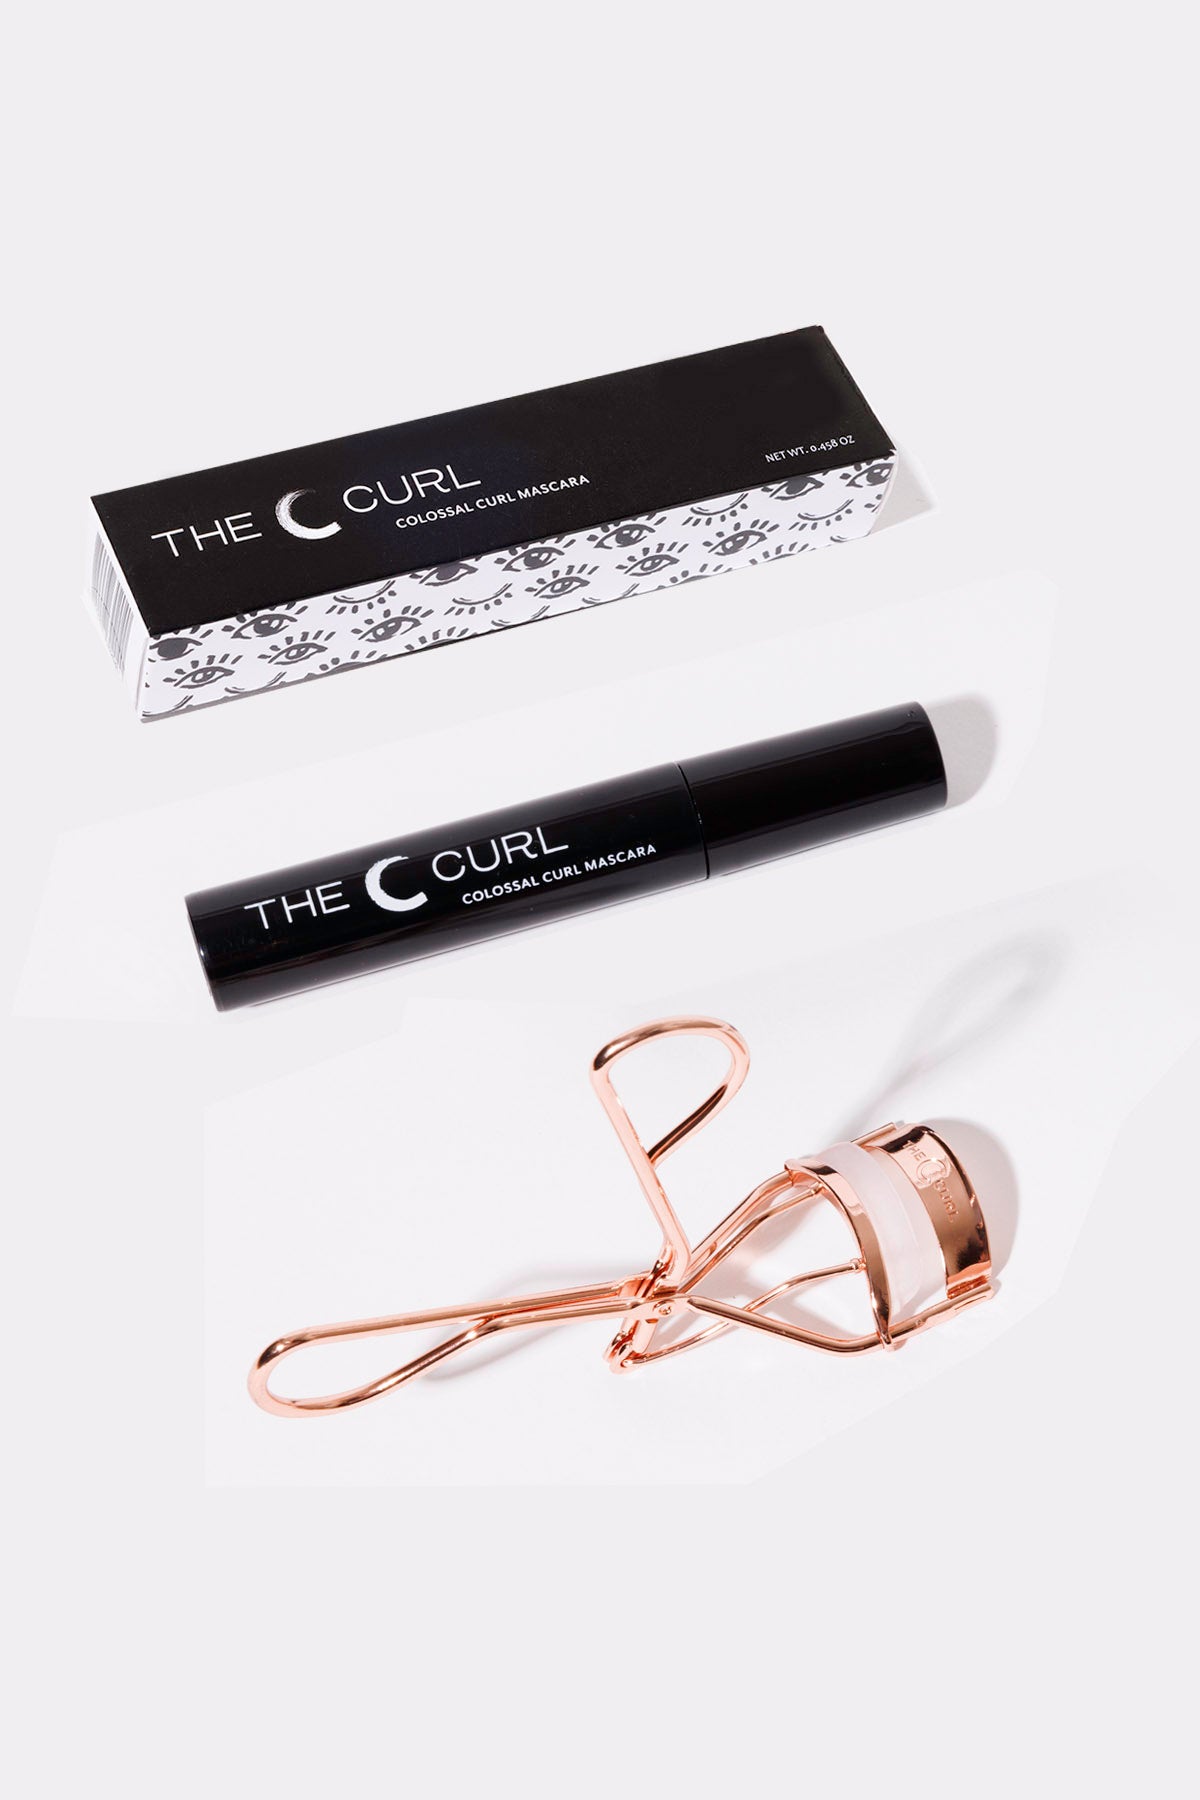 Colossal Curl Mascara + The C Curl